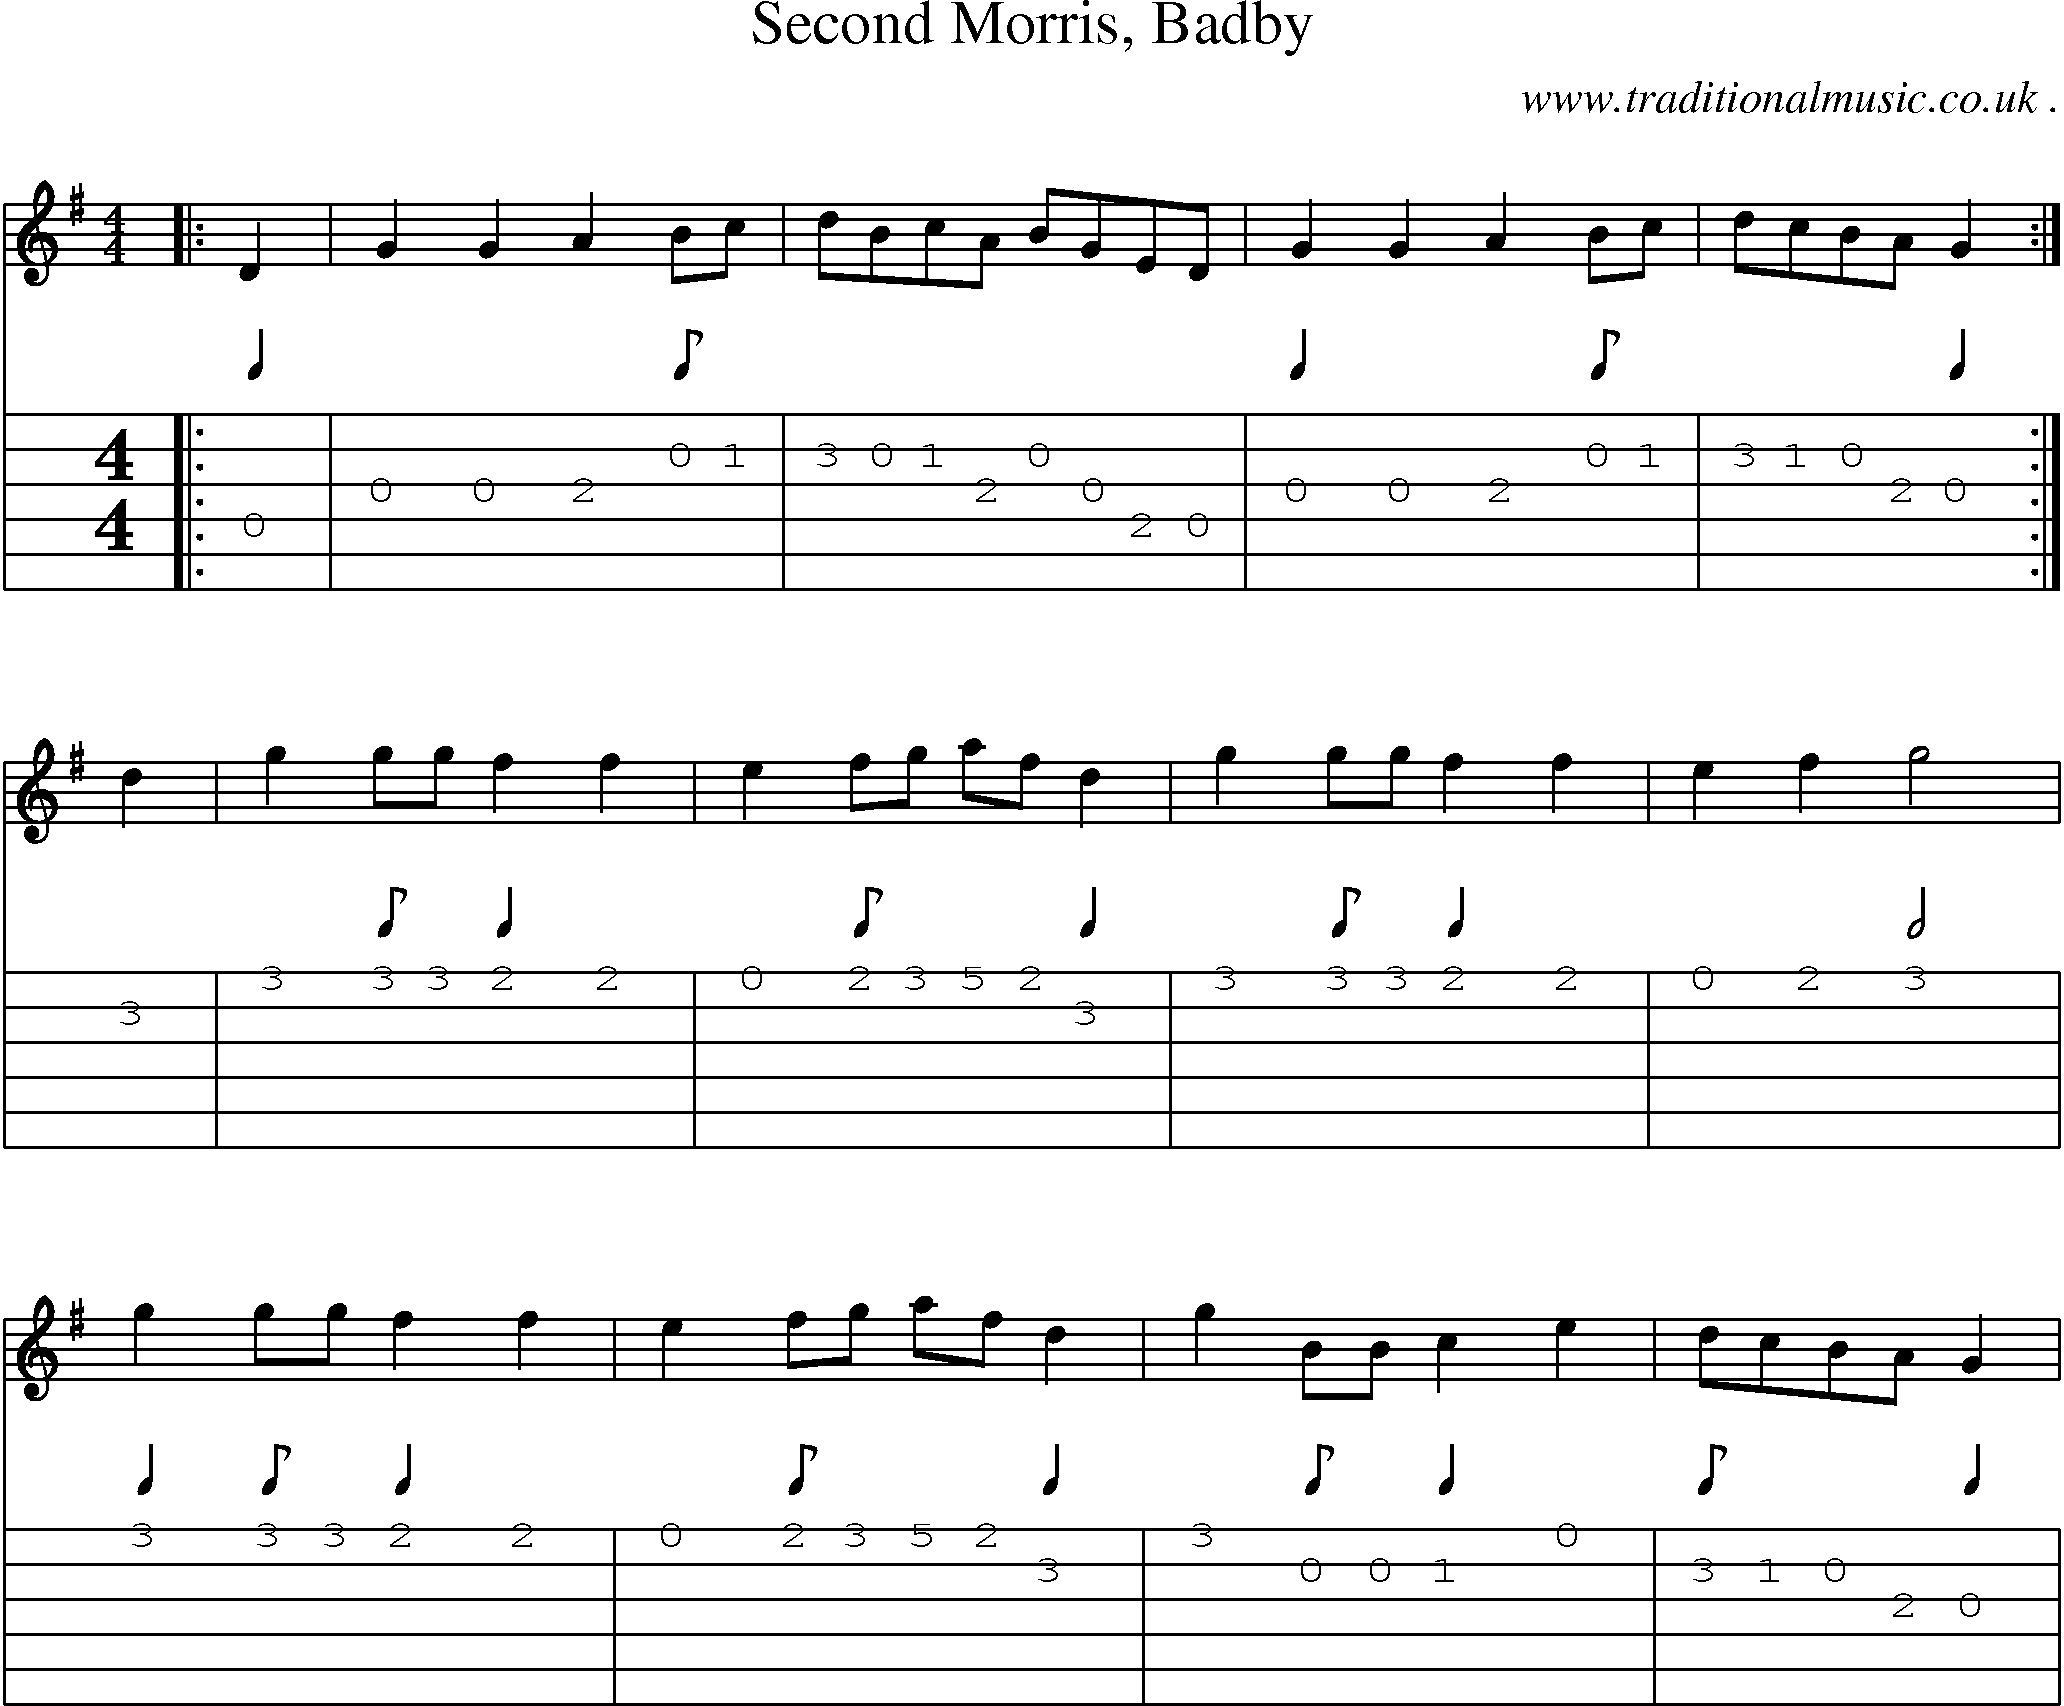 Sheet-Music and Guitar Tabs for Second Morris Badby